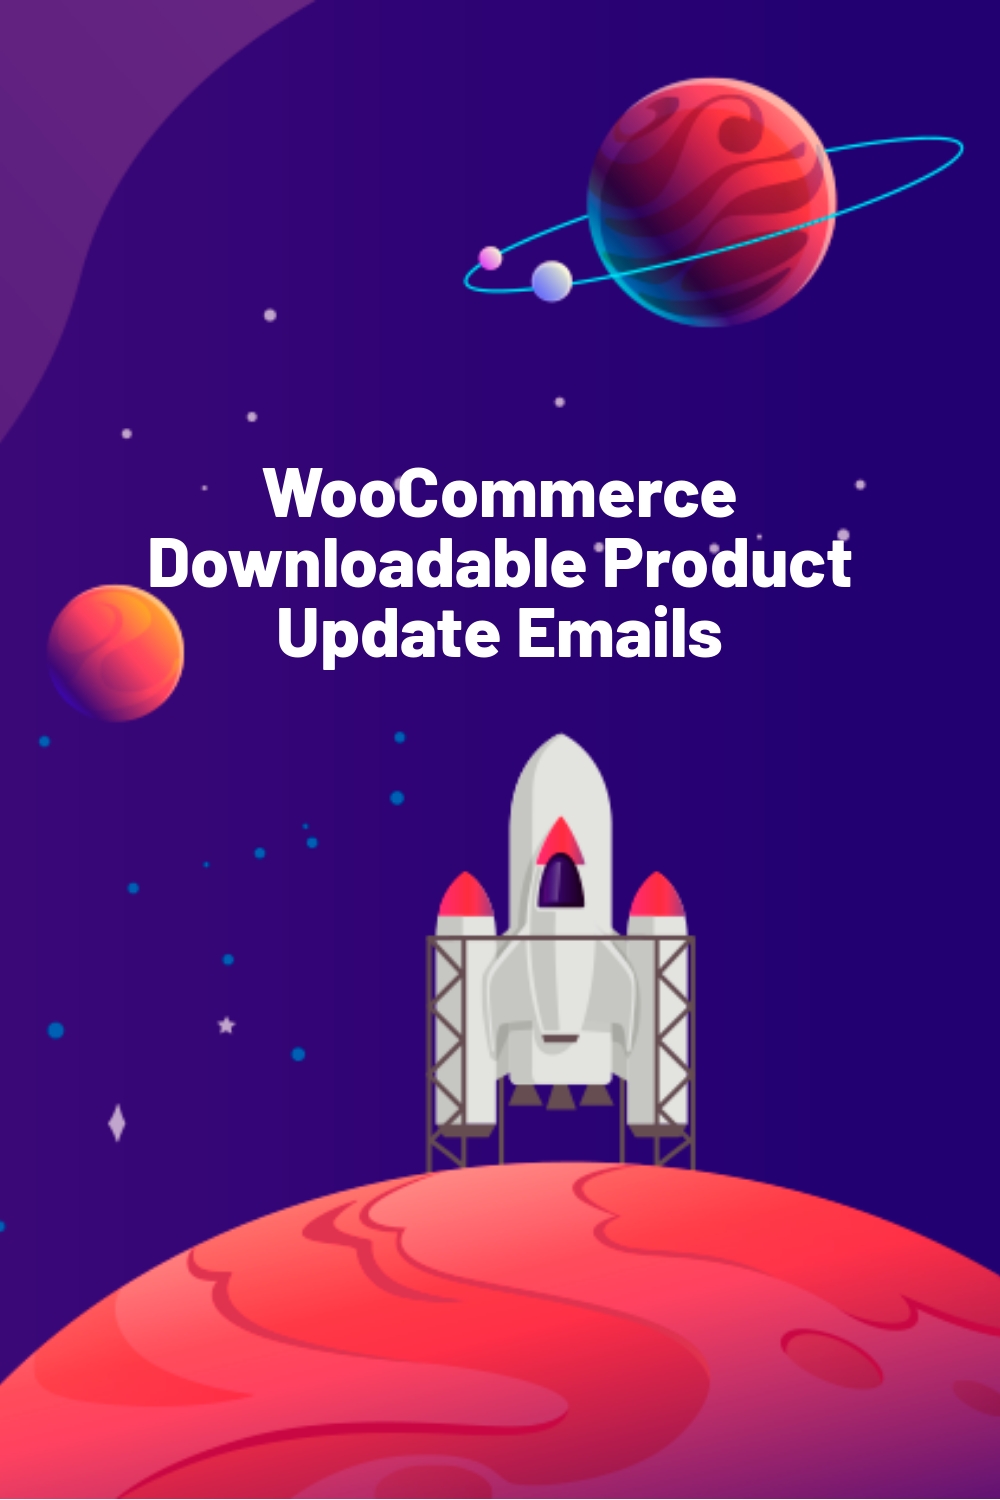 WooCommerce Downloadable Product Update Emails